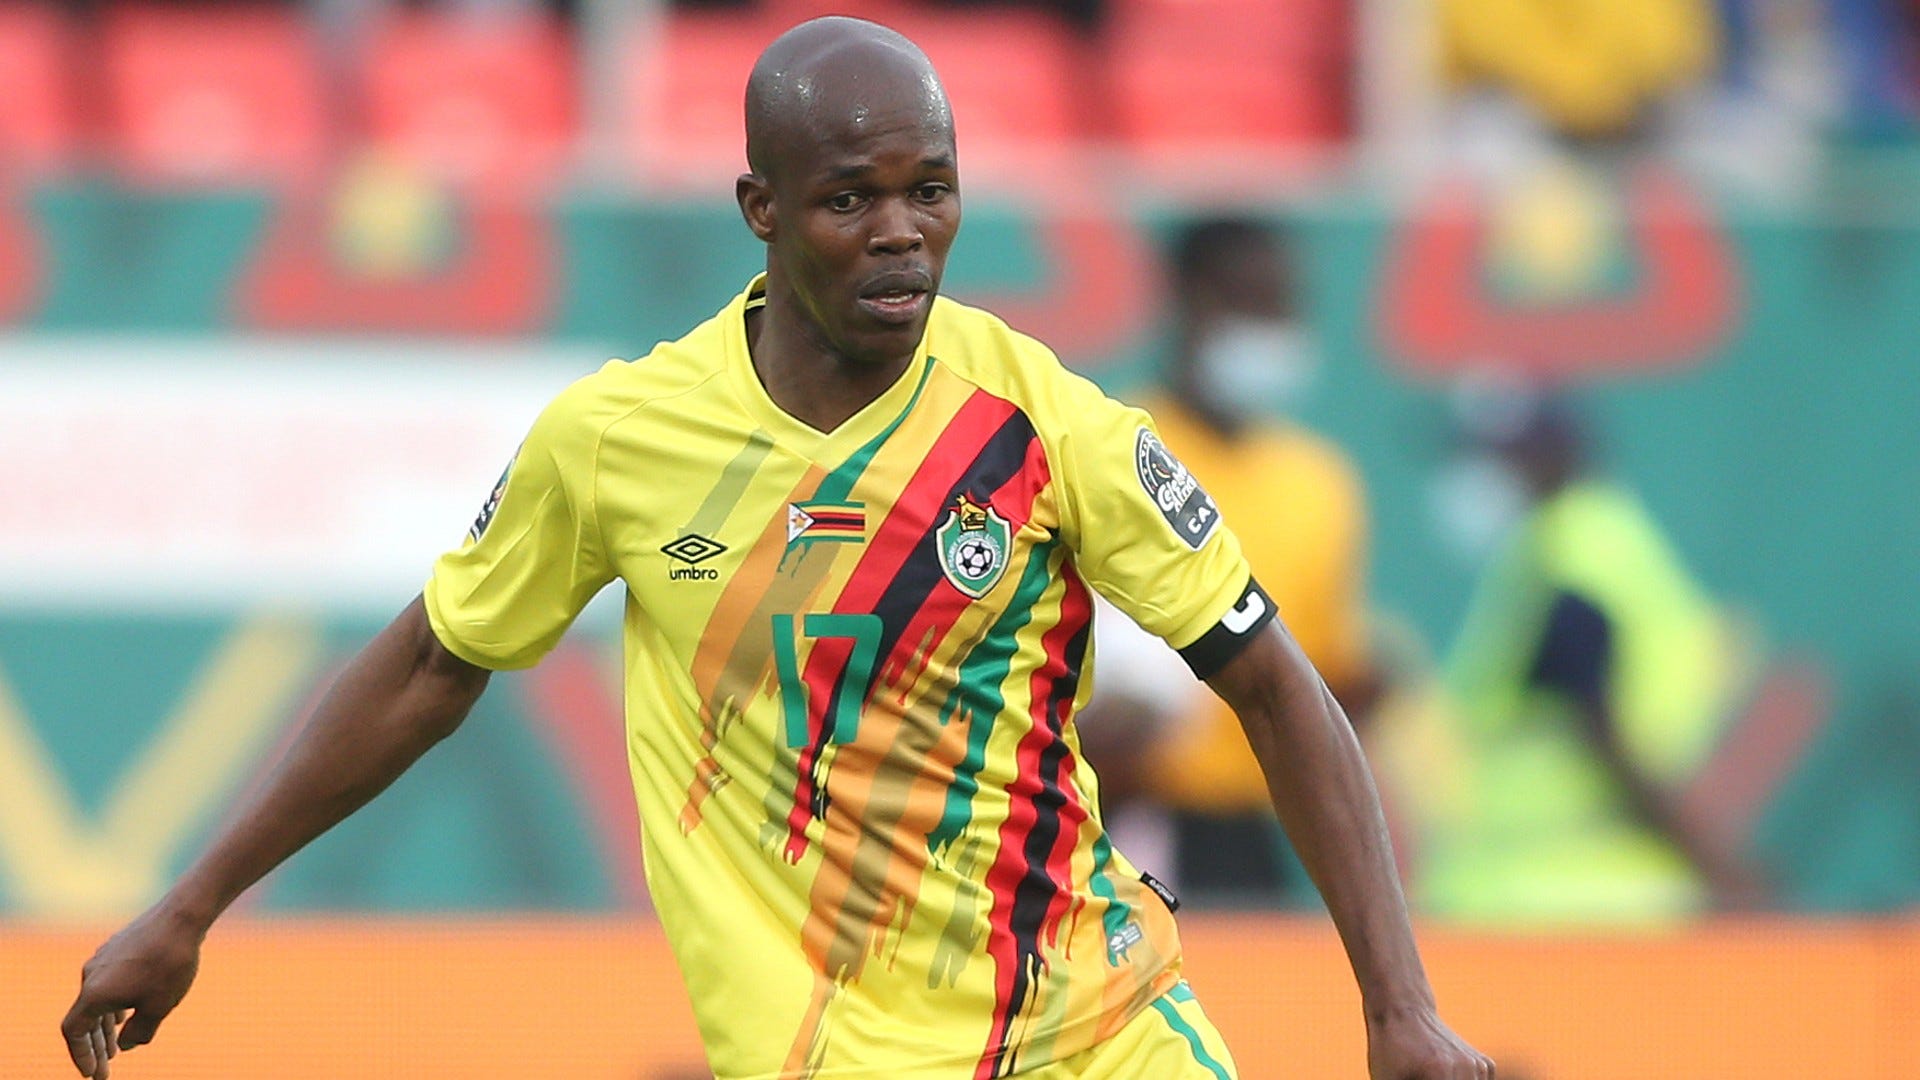 Afcon 2021: Zimbabwe's Musona thinking about future after early exit | Goal.com US